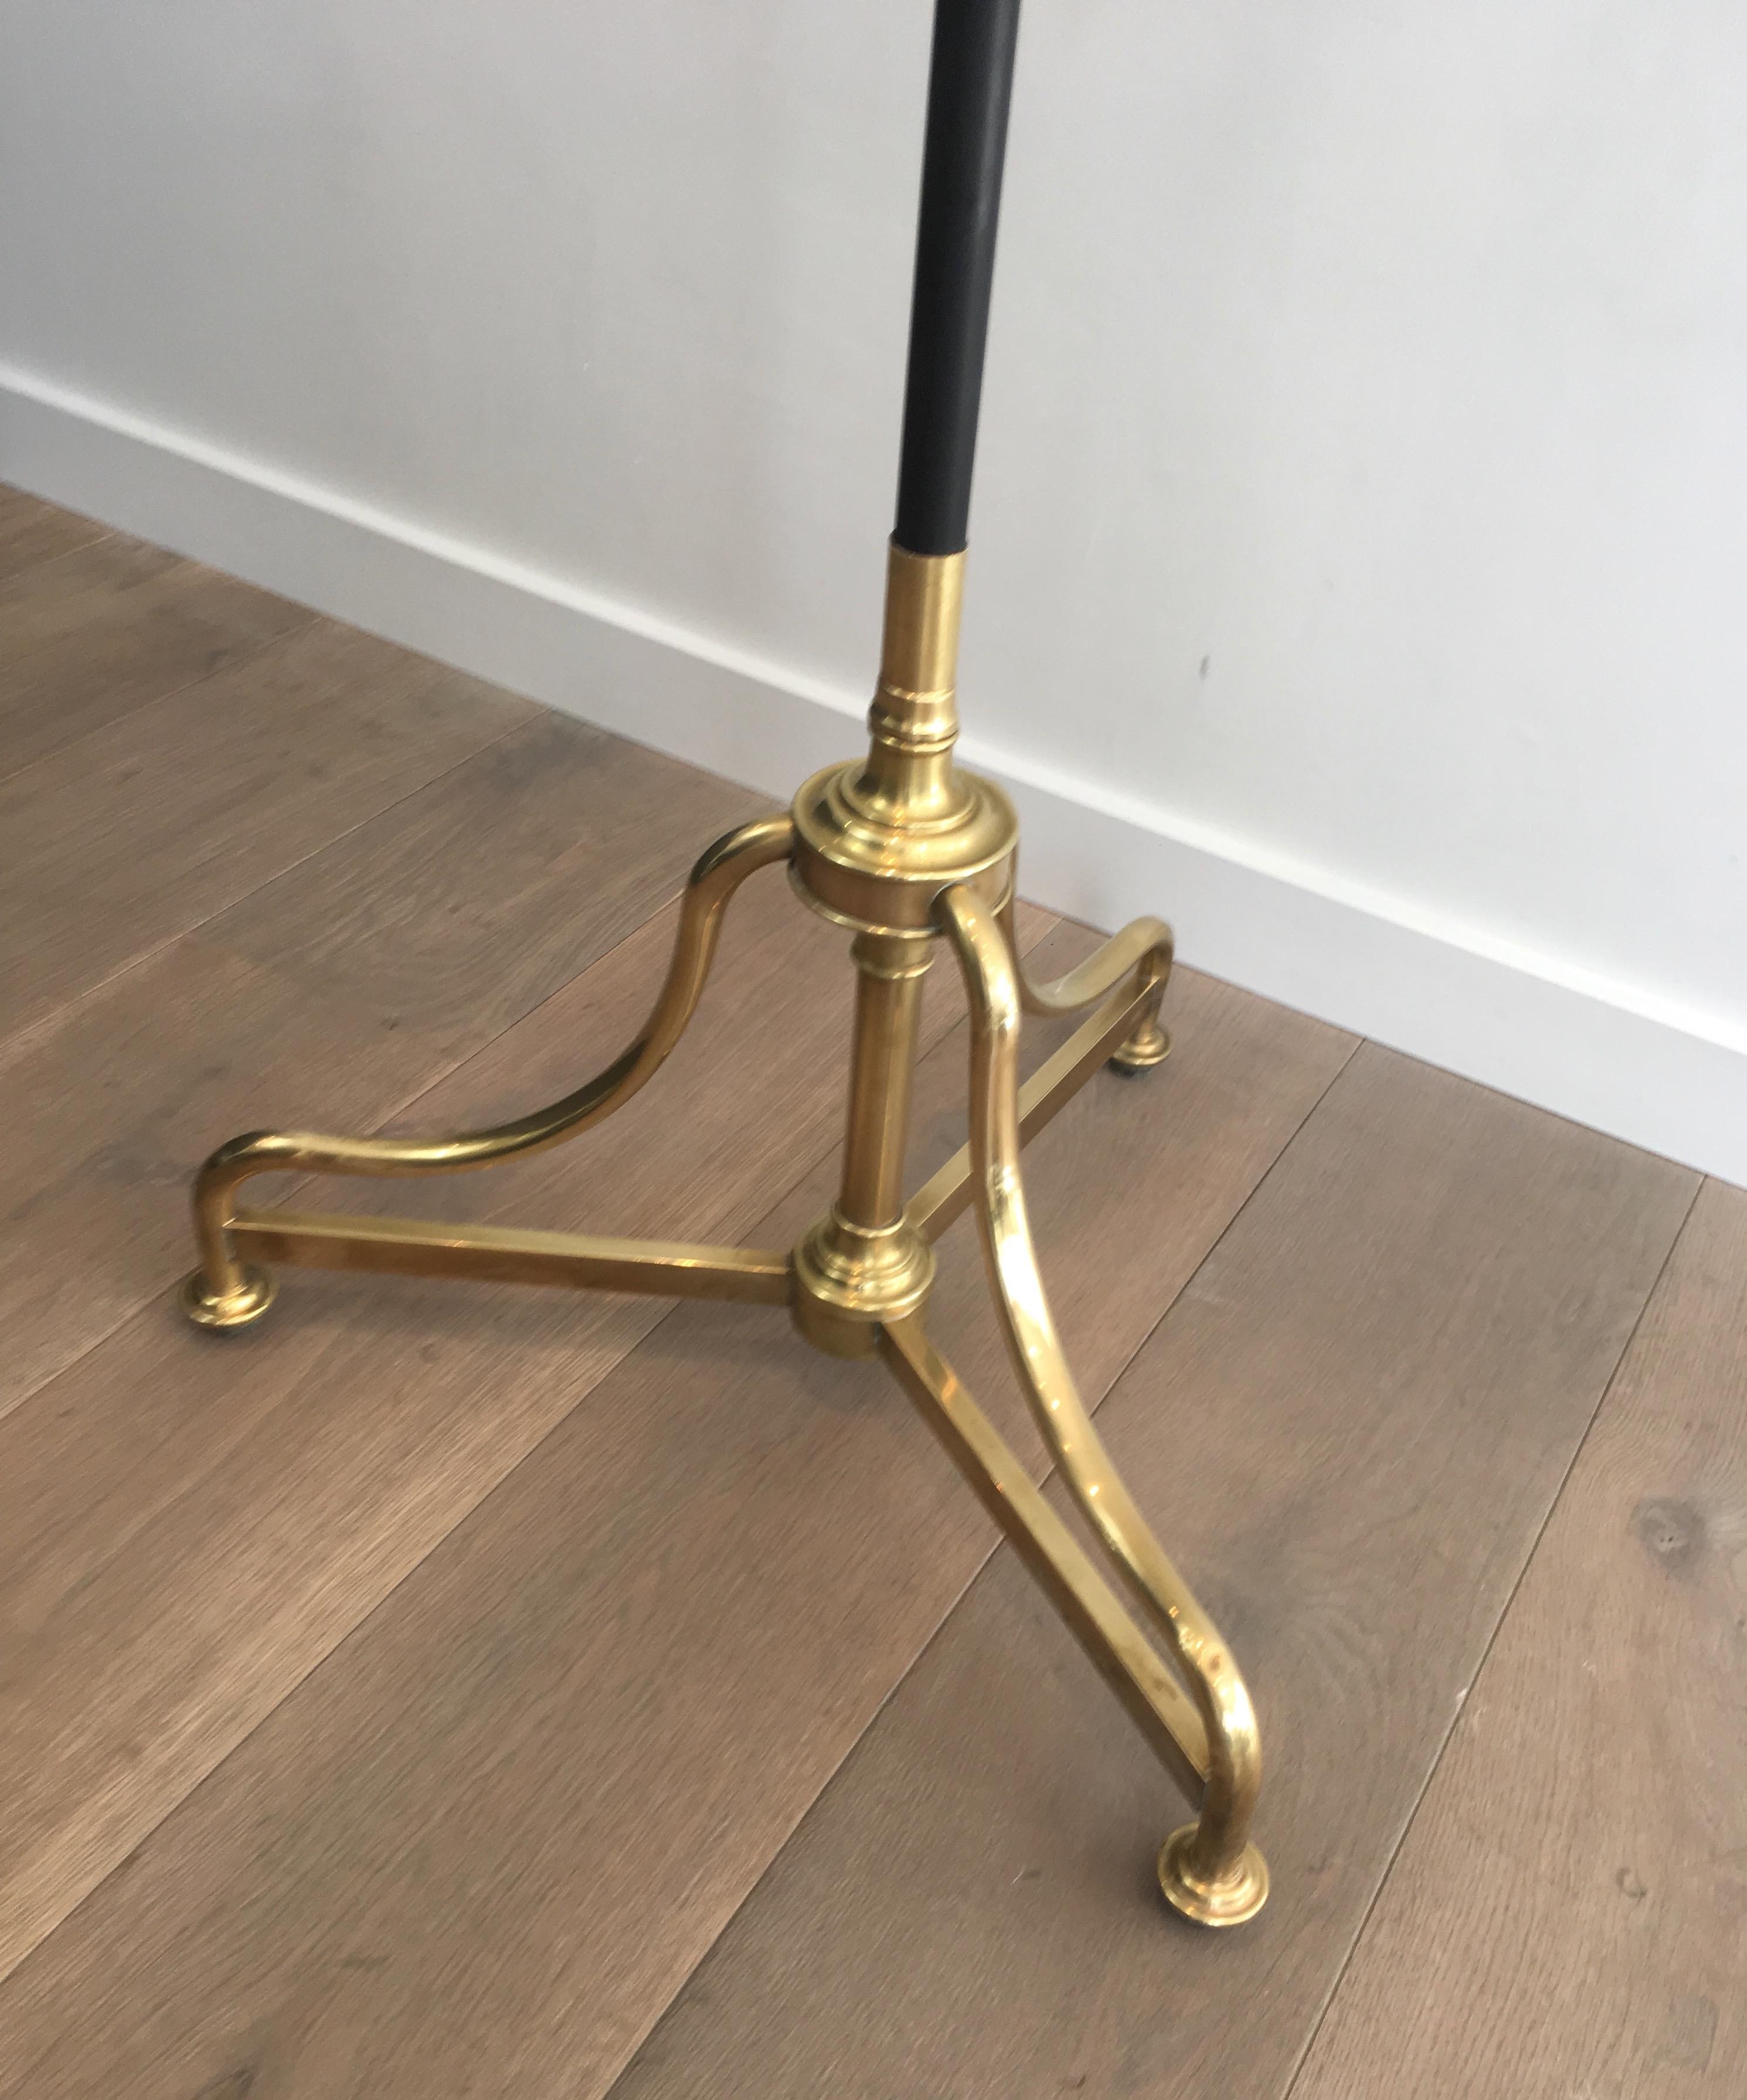 Unusual Tall Black Lacquered and Brass Coat and Hat Rack, French, circa 1900 For Sale 1